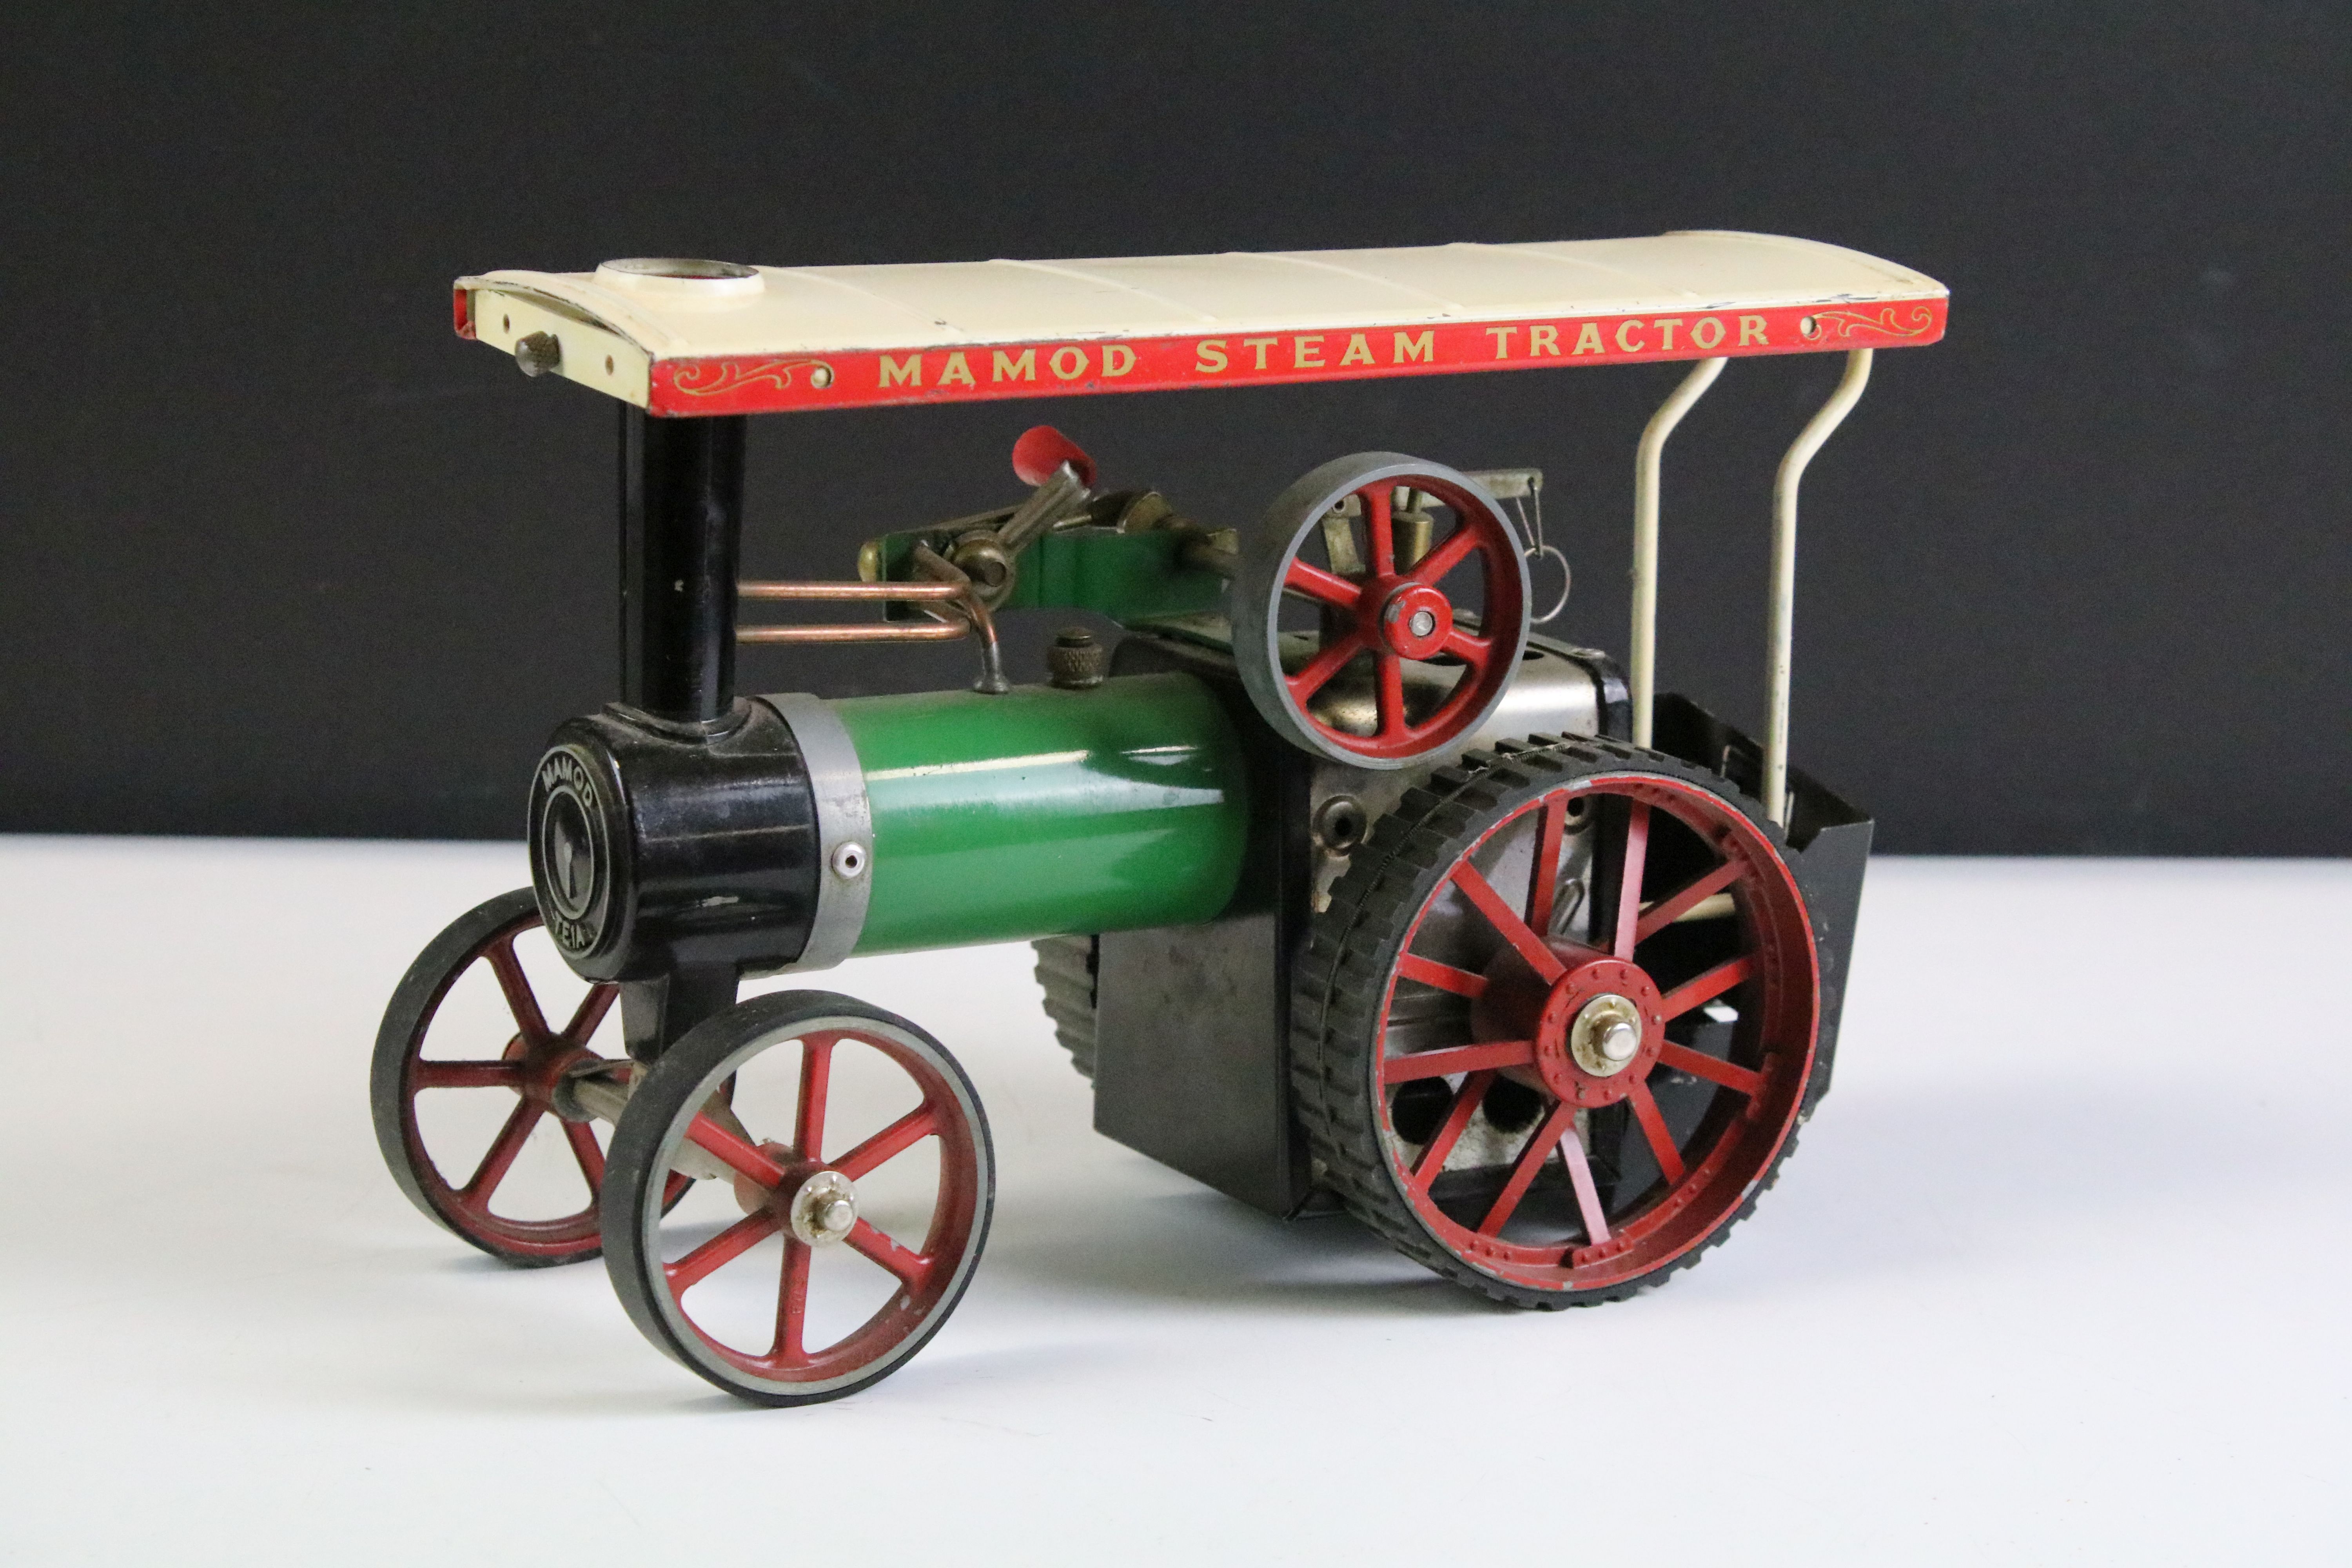 Mamod TE1A Steam Traction Engine plus an unmarked stationary steam engine and accessories - Image 5 of 6